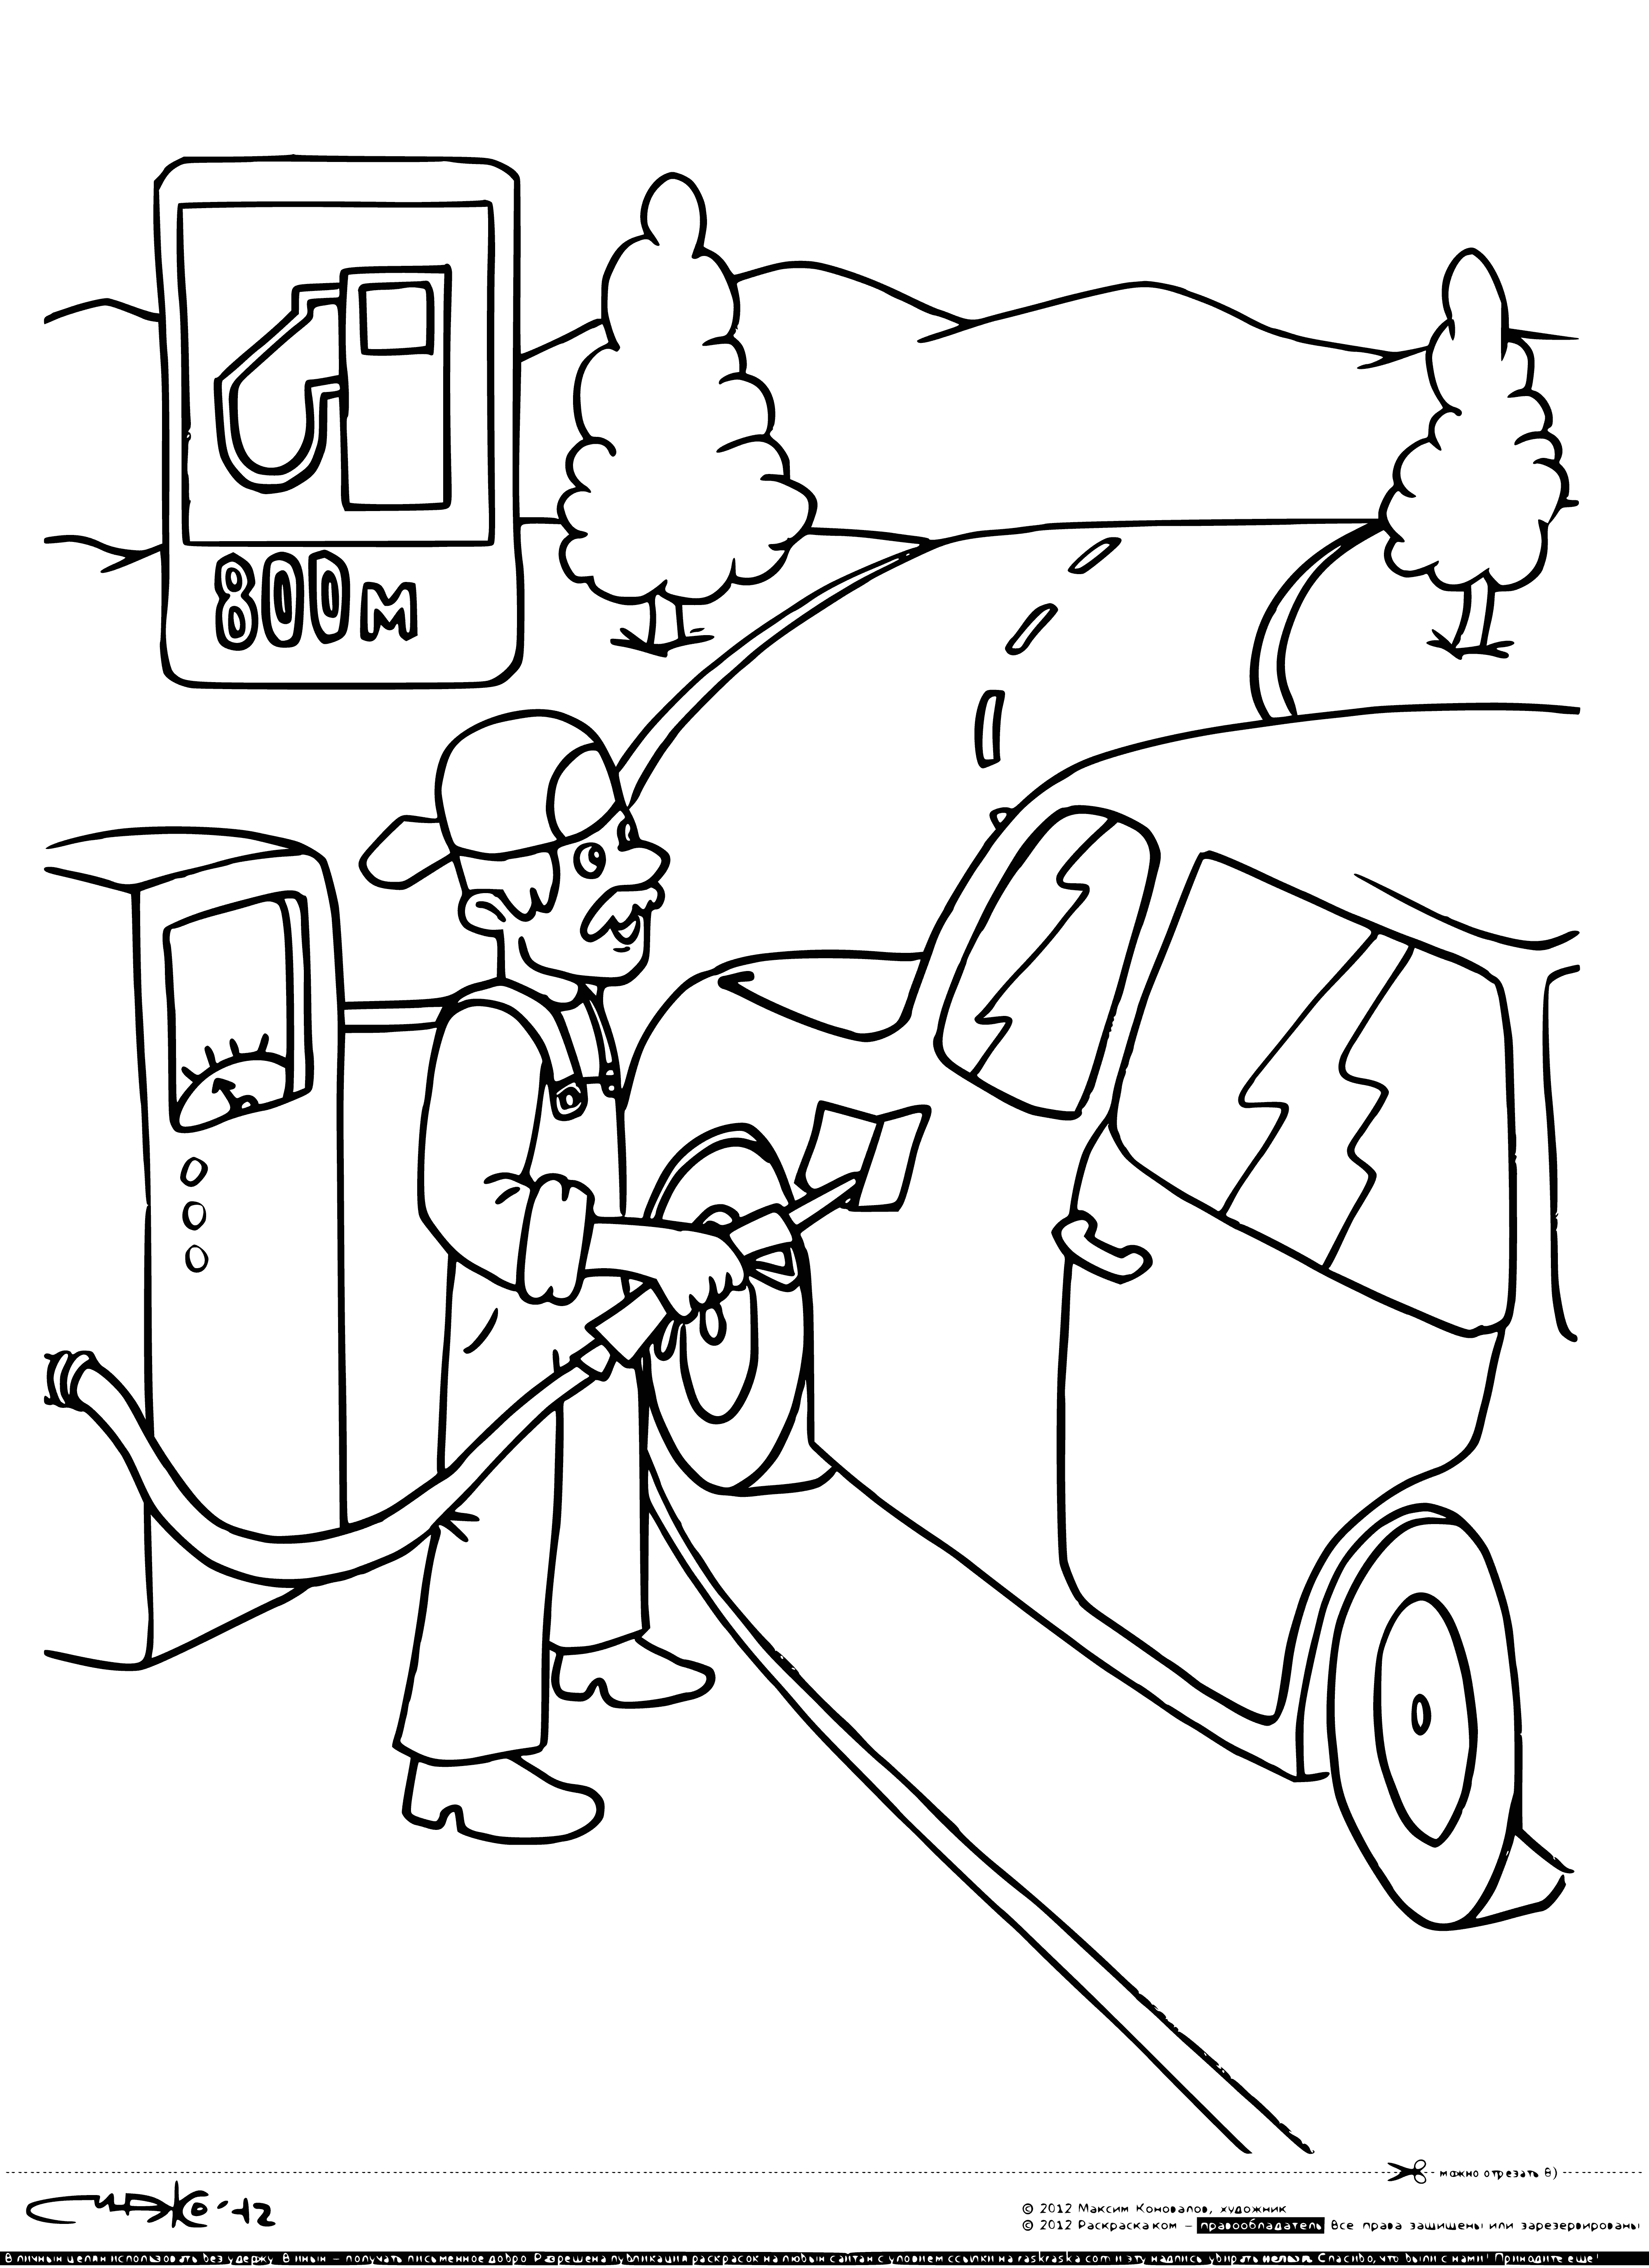 coloring page: Blue sign with white arrow pointing right & "Gas station" written under car outline.